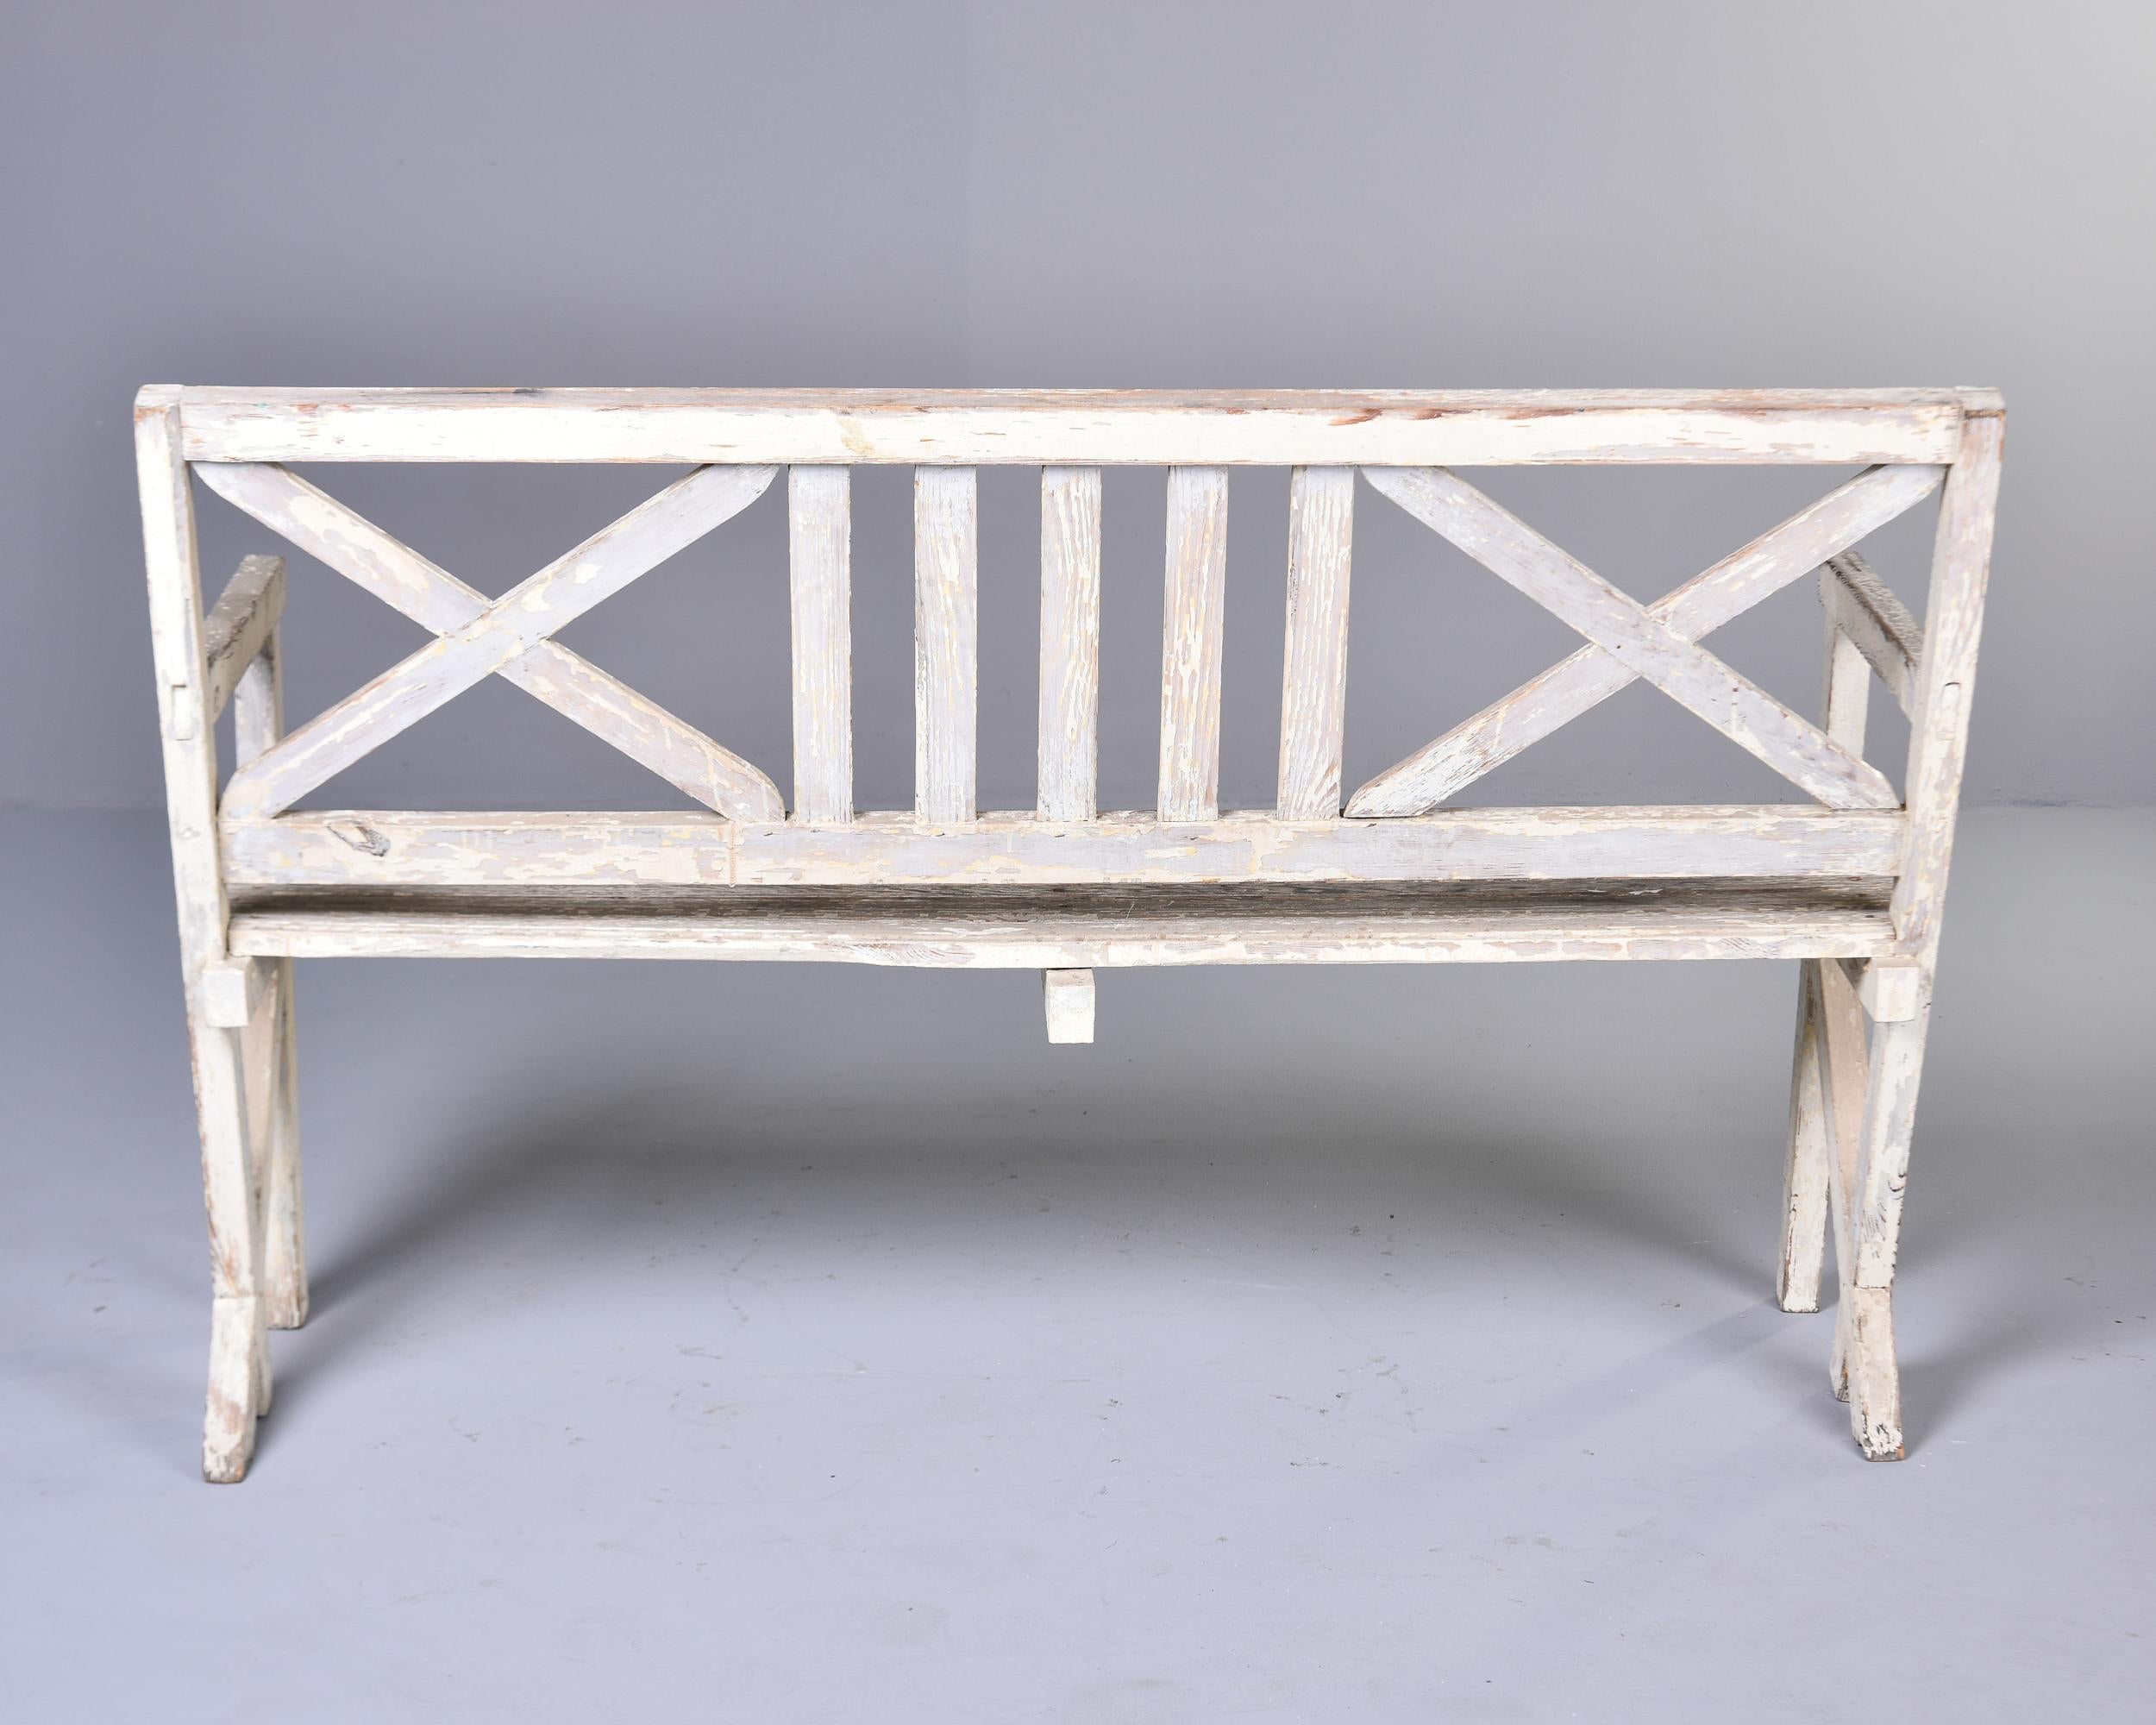 Antique English Painted Wood Bench with Cross Accented Back For Sale 5